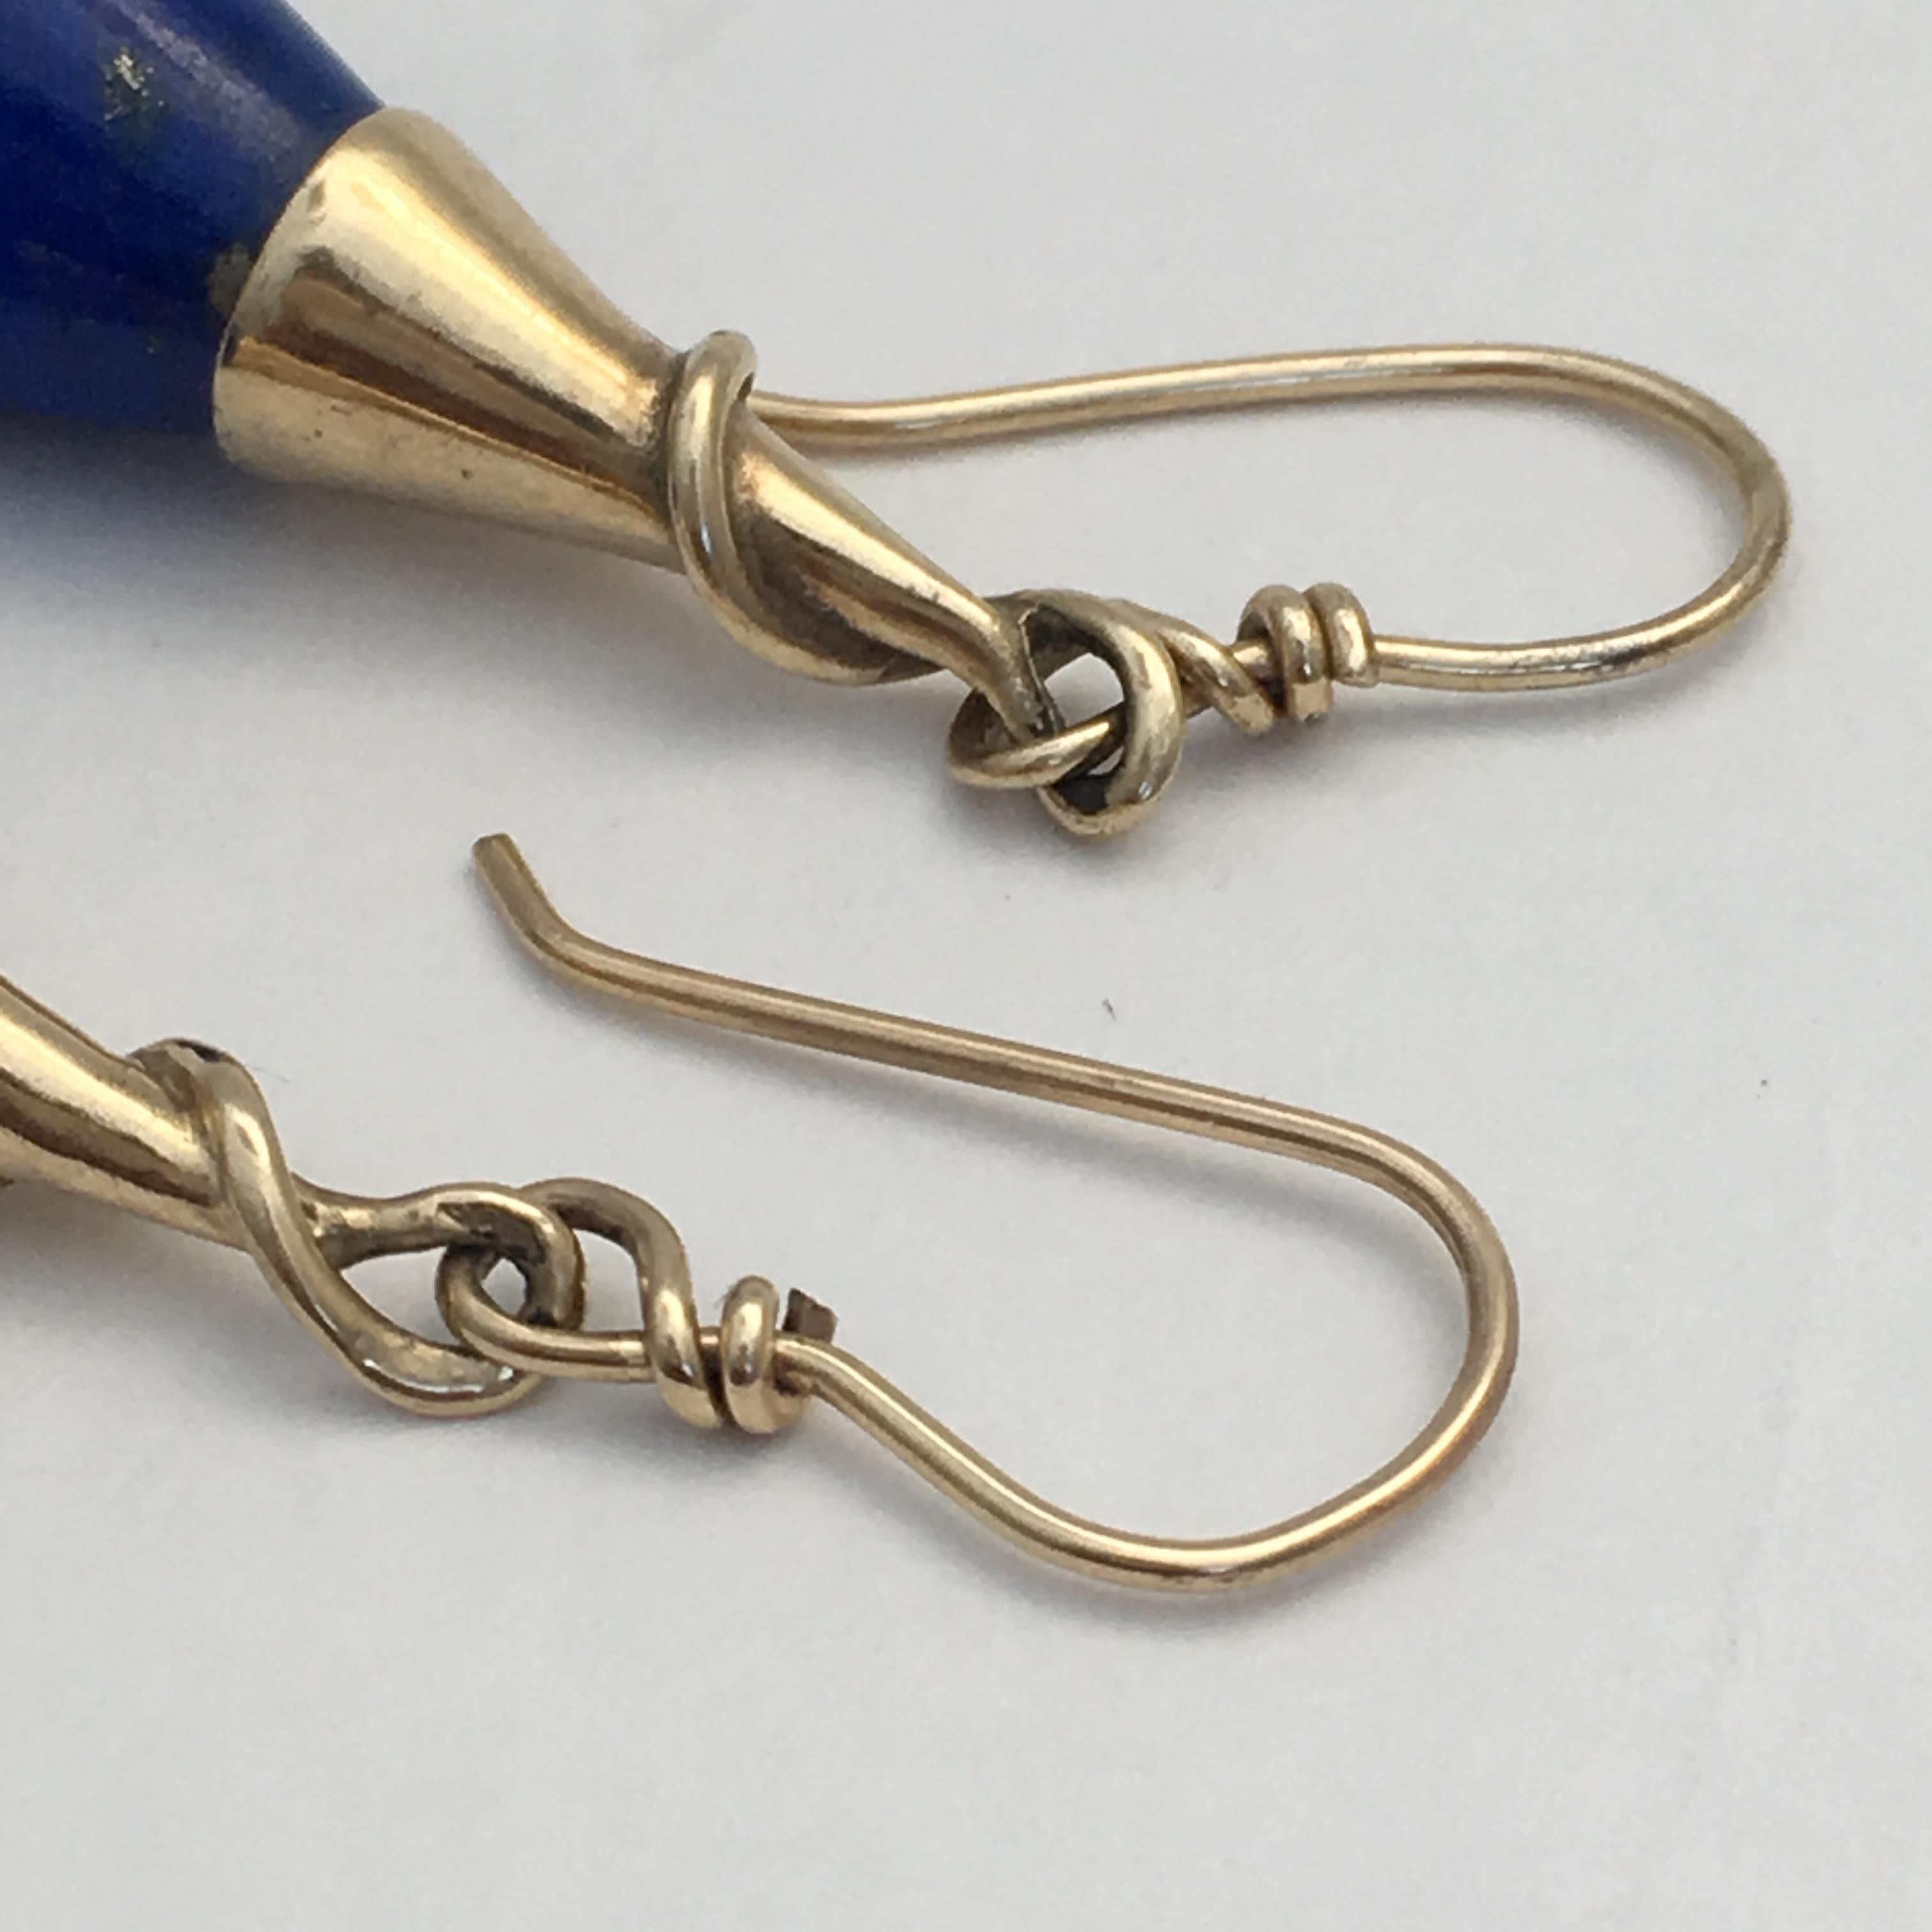 Lapis Lazuli Drop Earrings Torpedo Vintage Gold Jewelry Cobalt Blue Modernist In Excellent Condition For Sale In London, GB